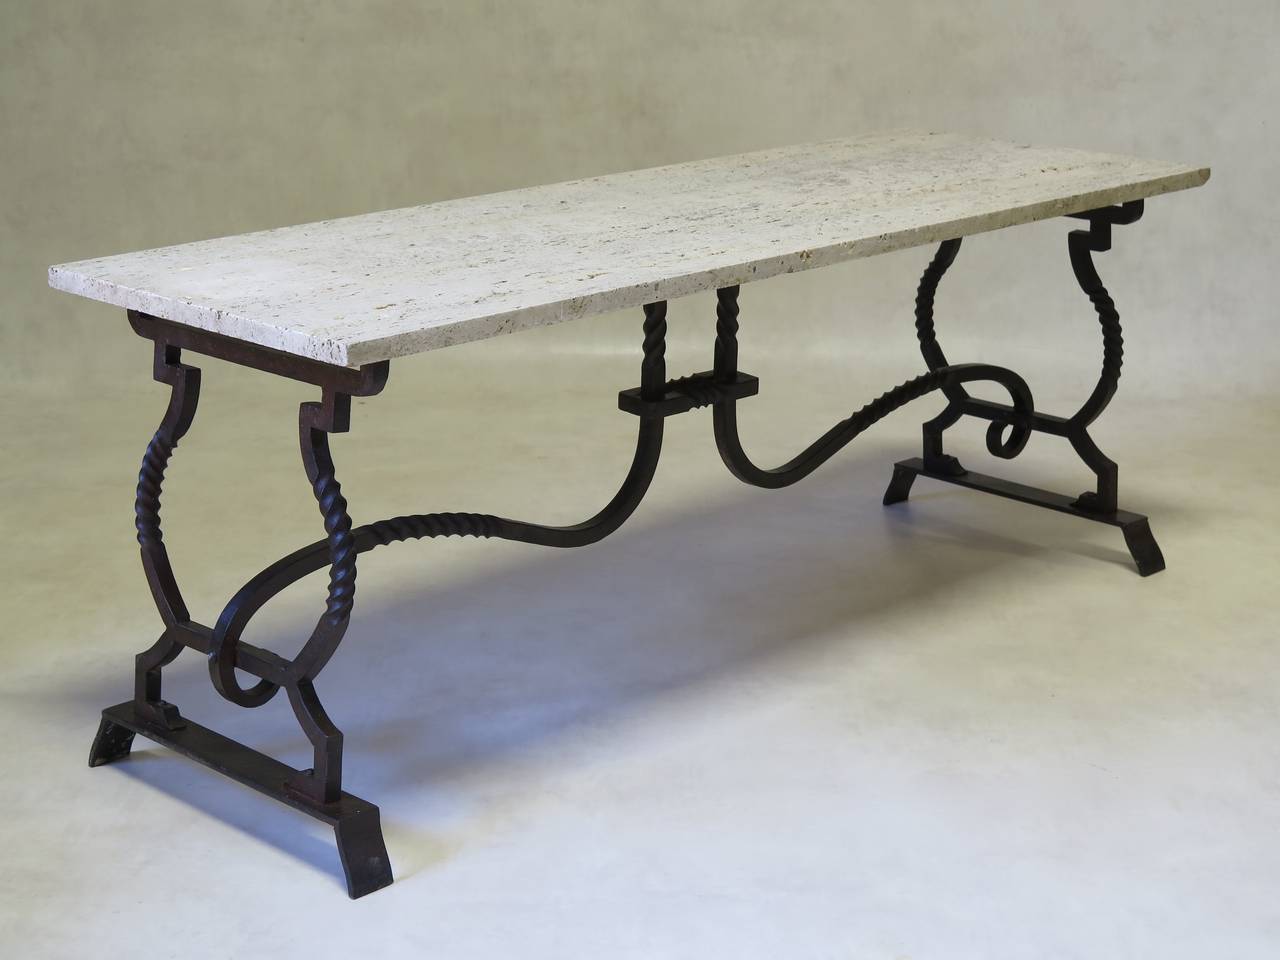 20th Century Wrought Iron and Travertine Coffee Table, France, 1940s-1950s